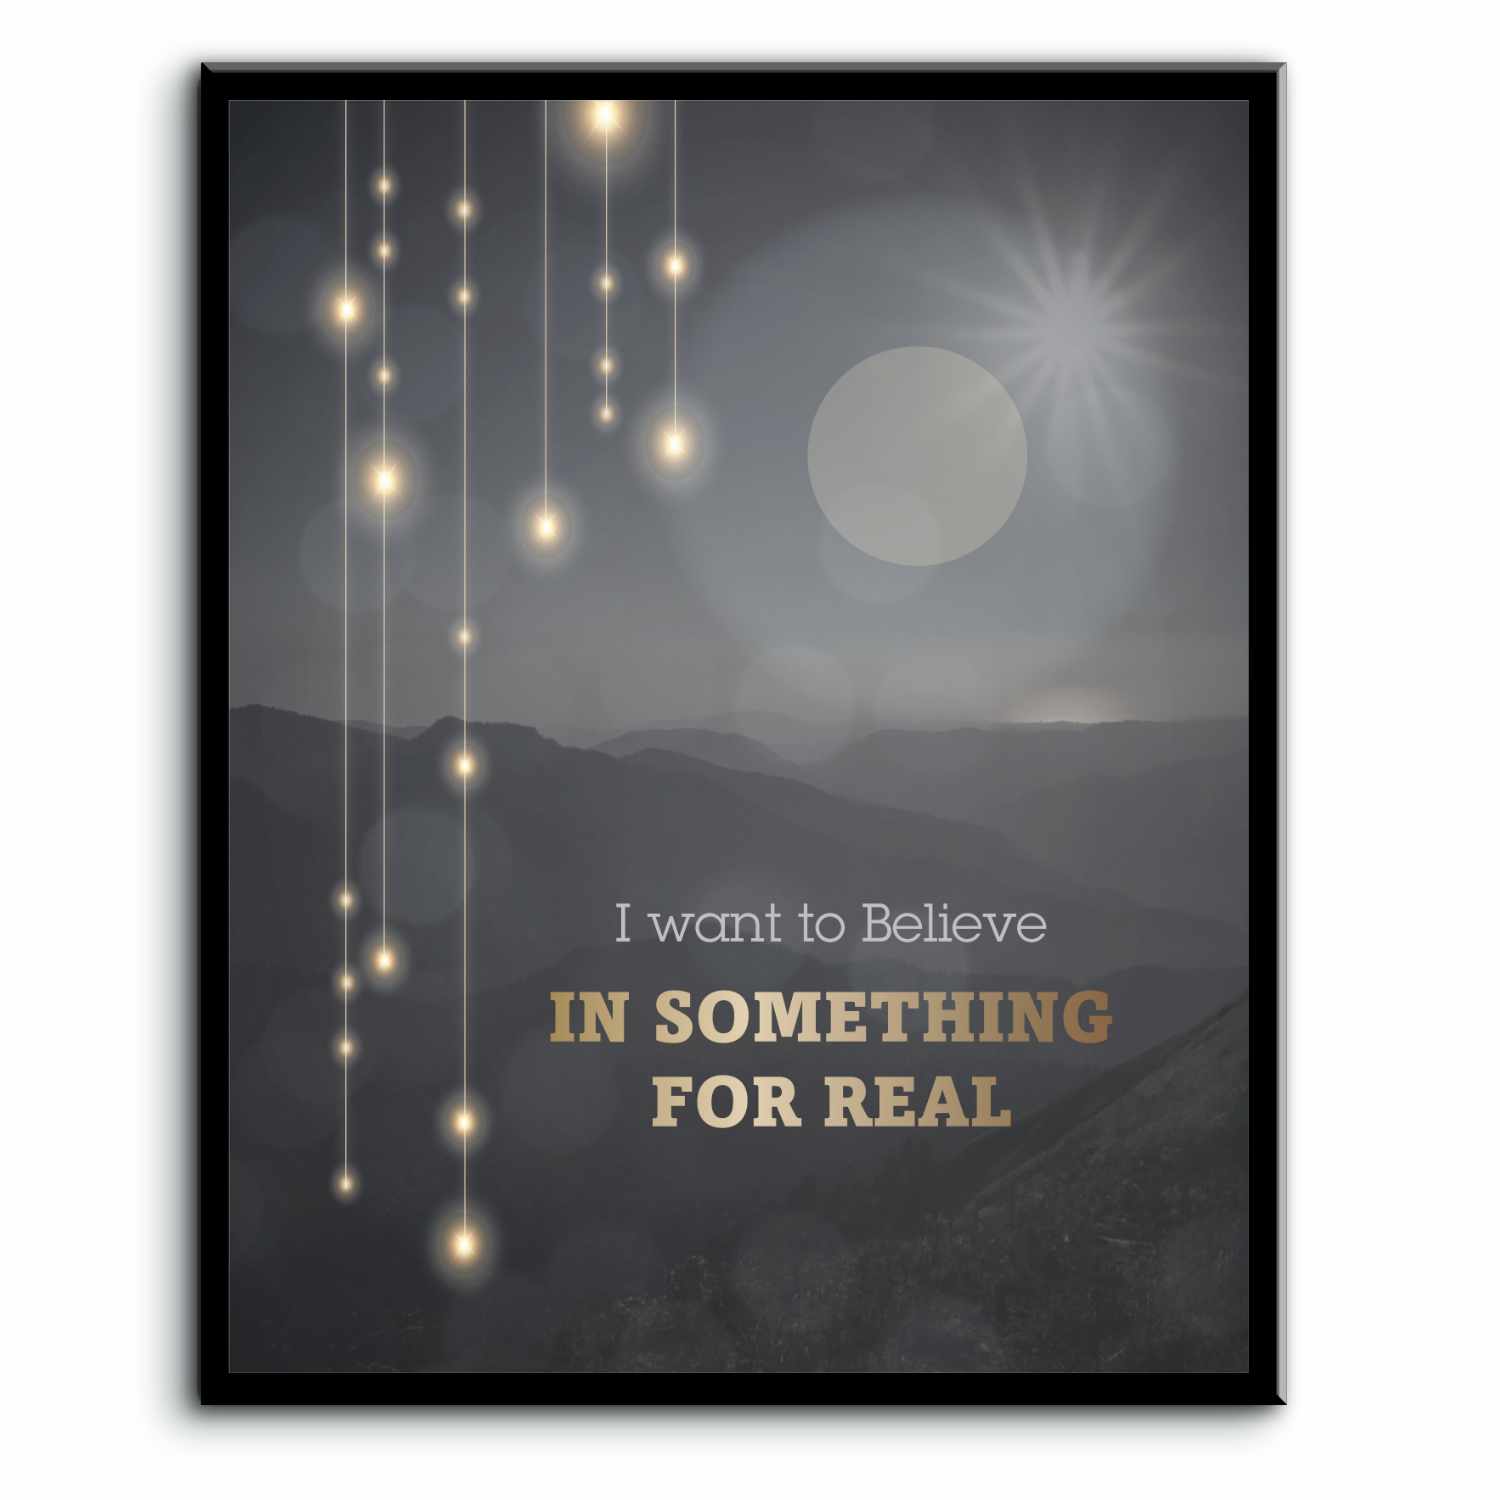 I Want to Believe by Sass Jordan - 80s Music Lyric Art Print Song Lyrics Art Song Lyrics Art 8x10 Plaque Mount 